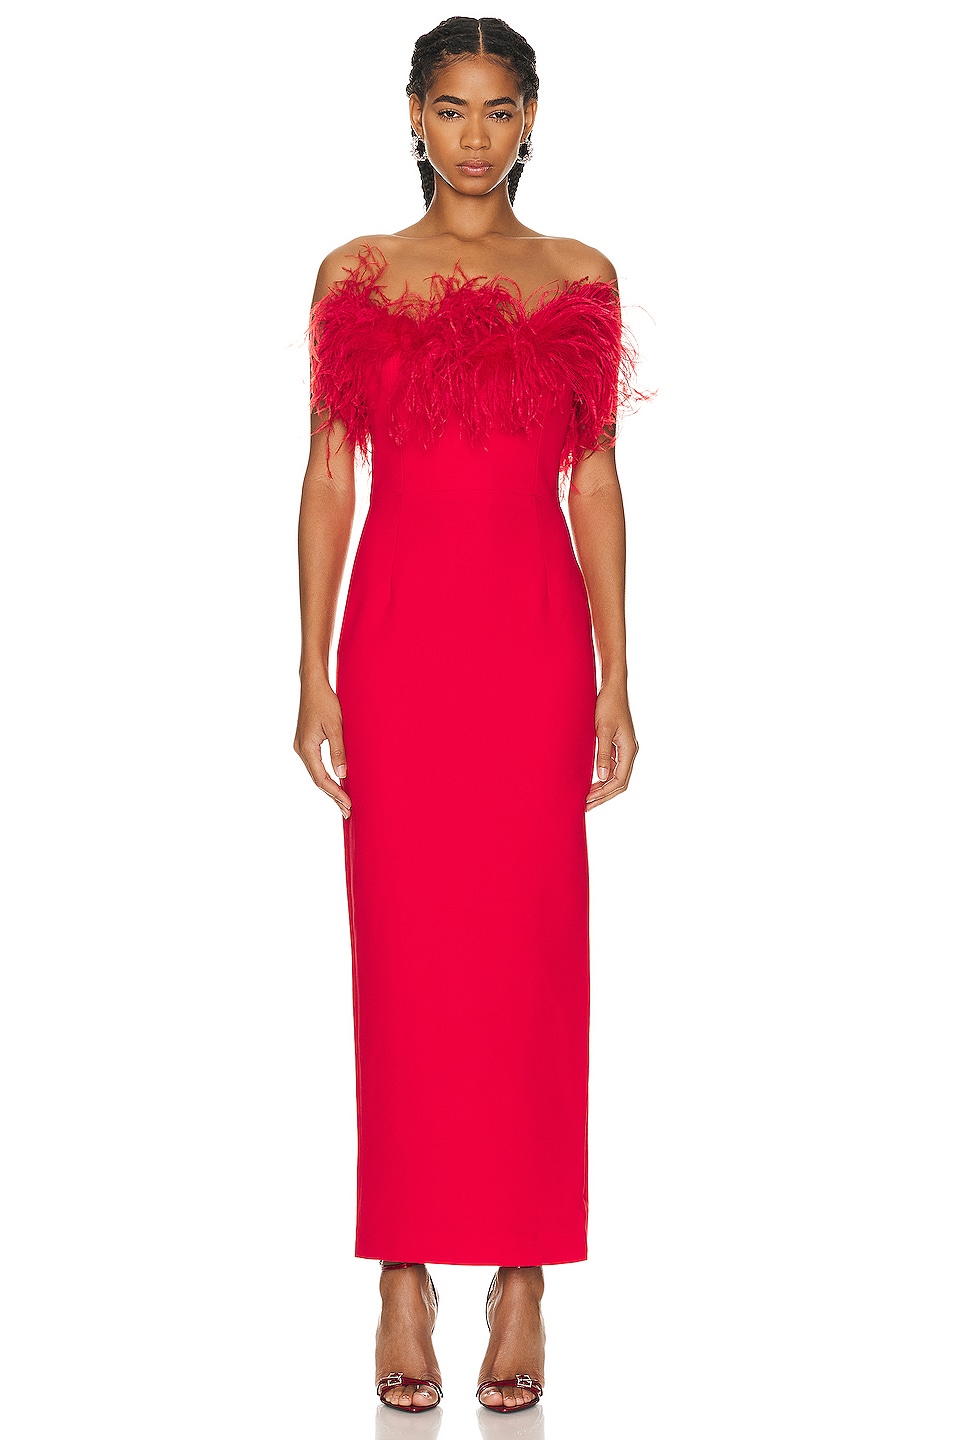 Image 1 of The New Arrivals by Ilkyaz Ozel Lena Dress in Pedro Red